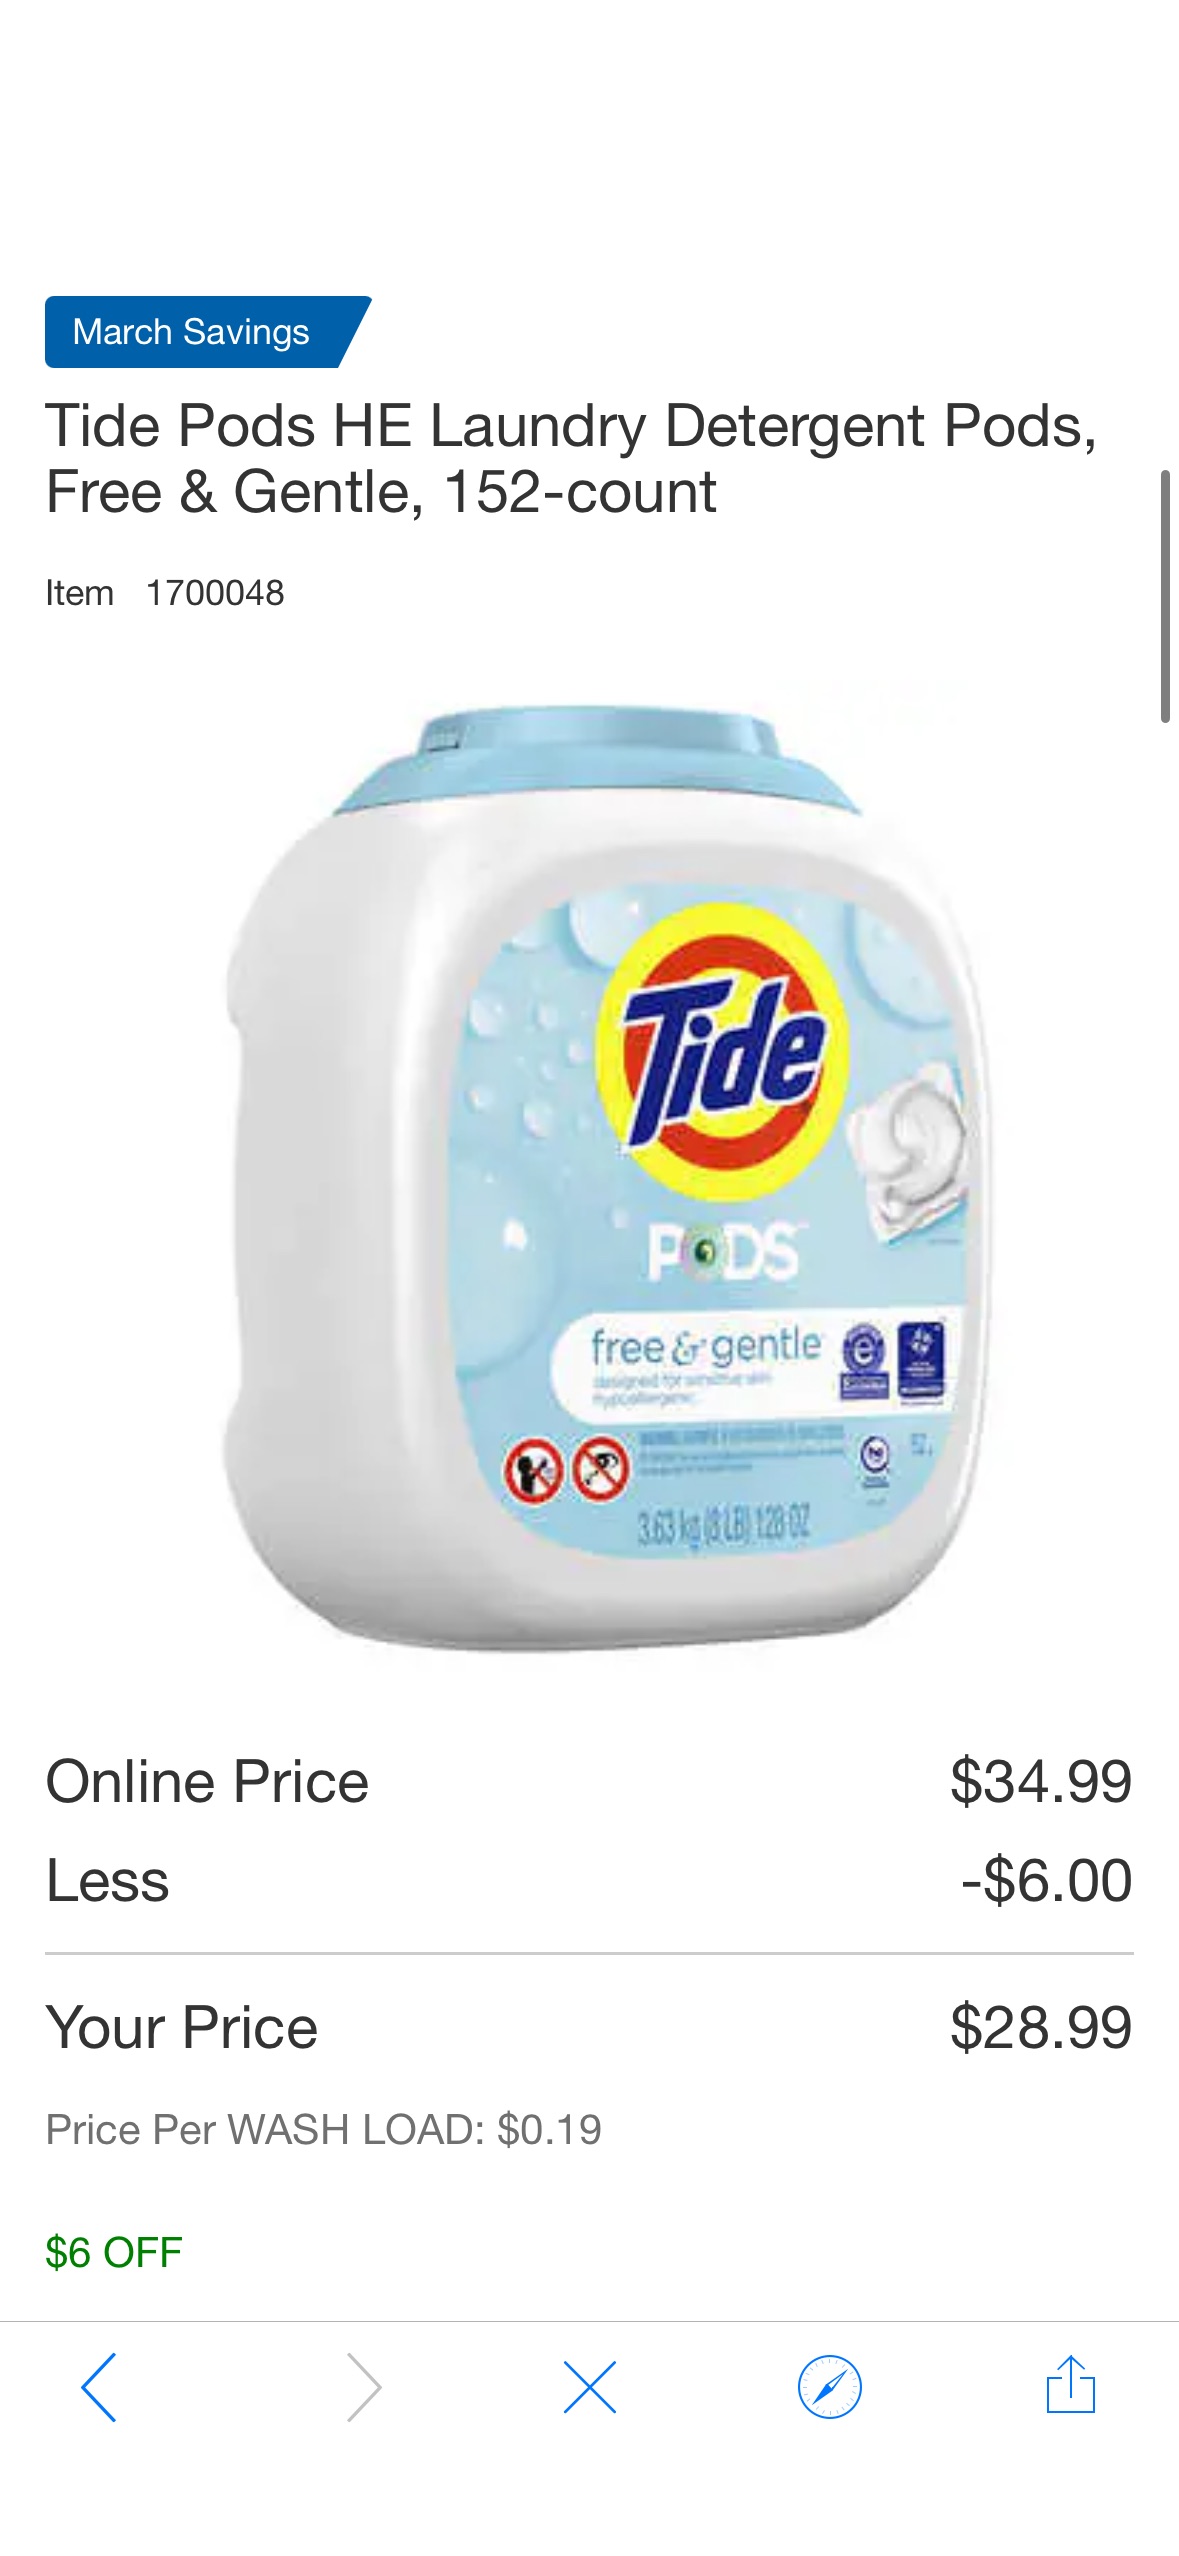 Tide Pods HE Laundry Detergent Pods, Free & Gentle, 152-count | Costco